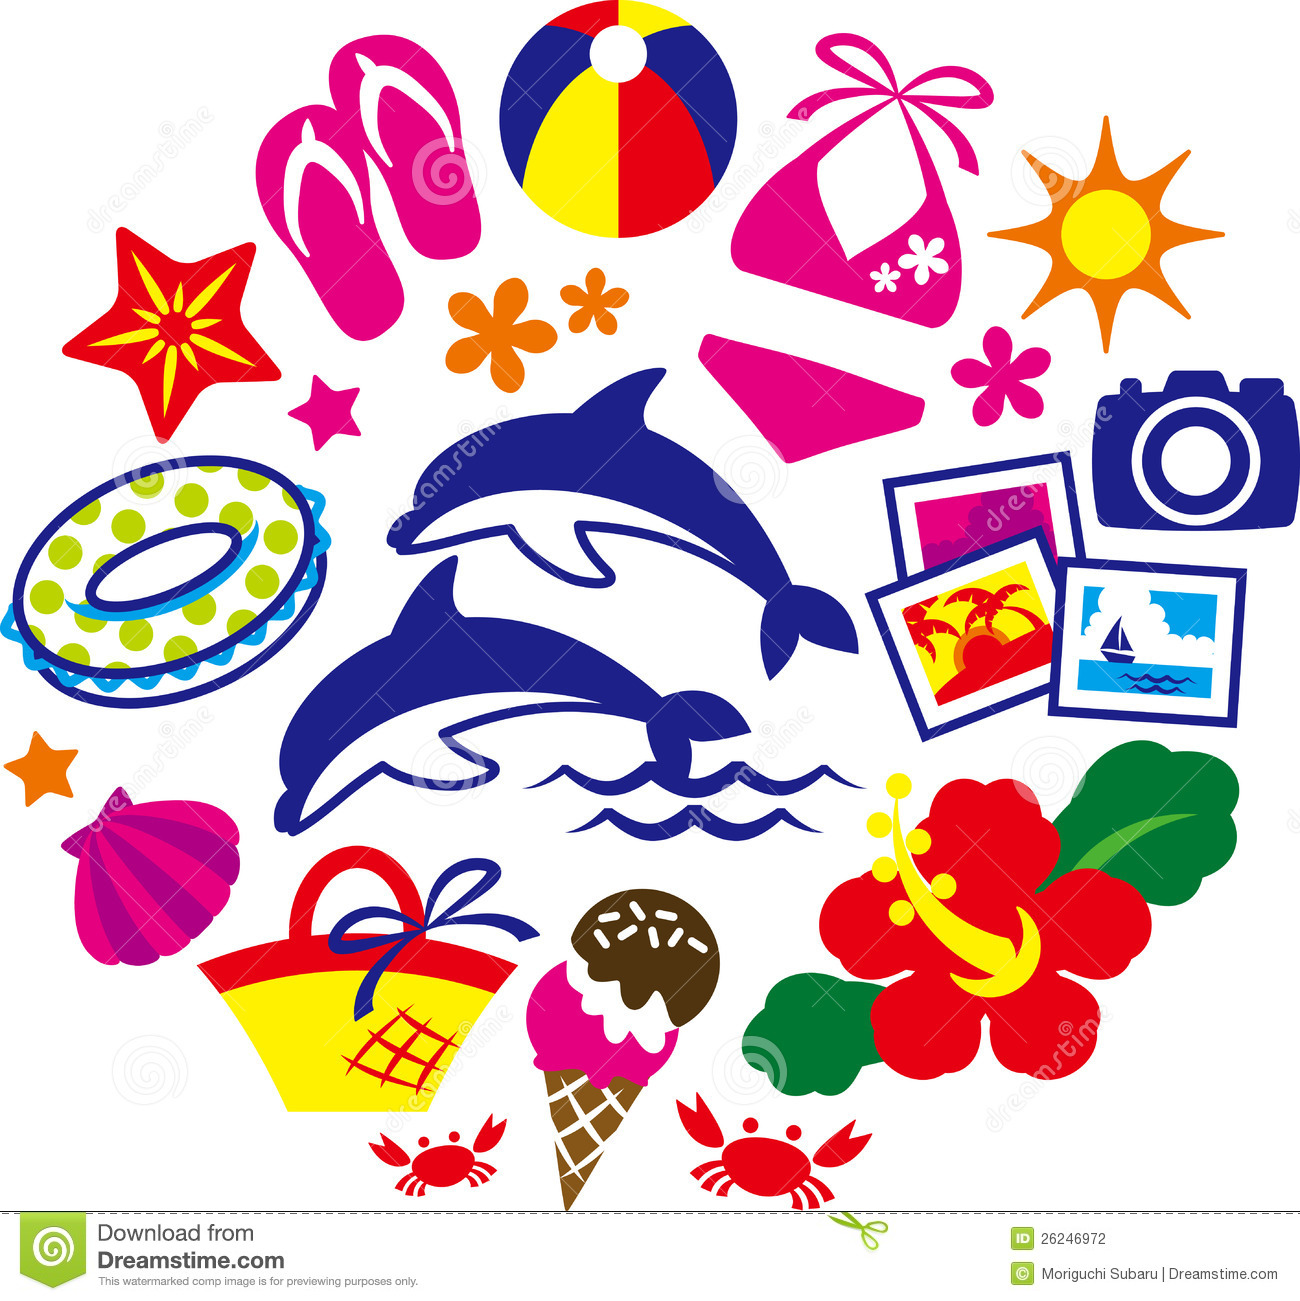 Clip art summer stock images image 2